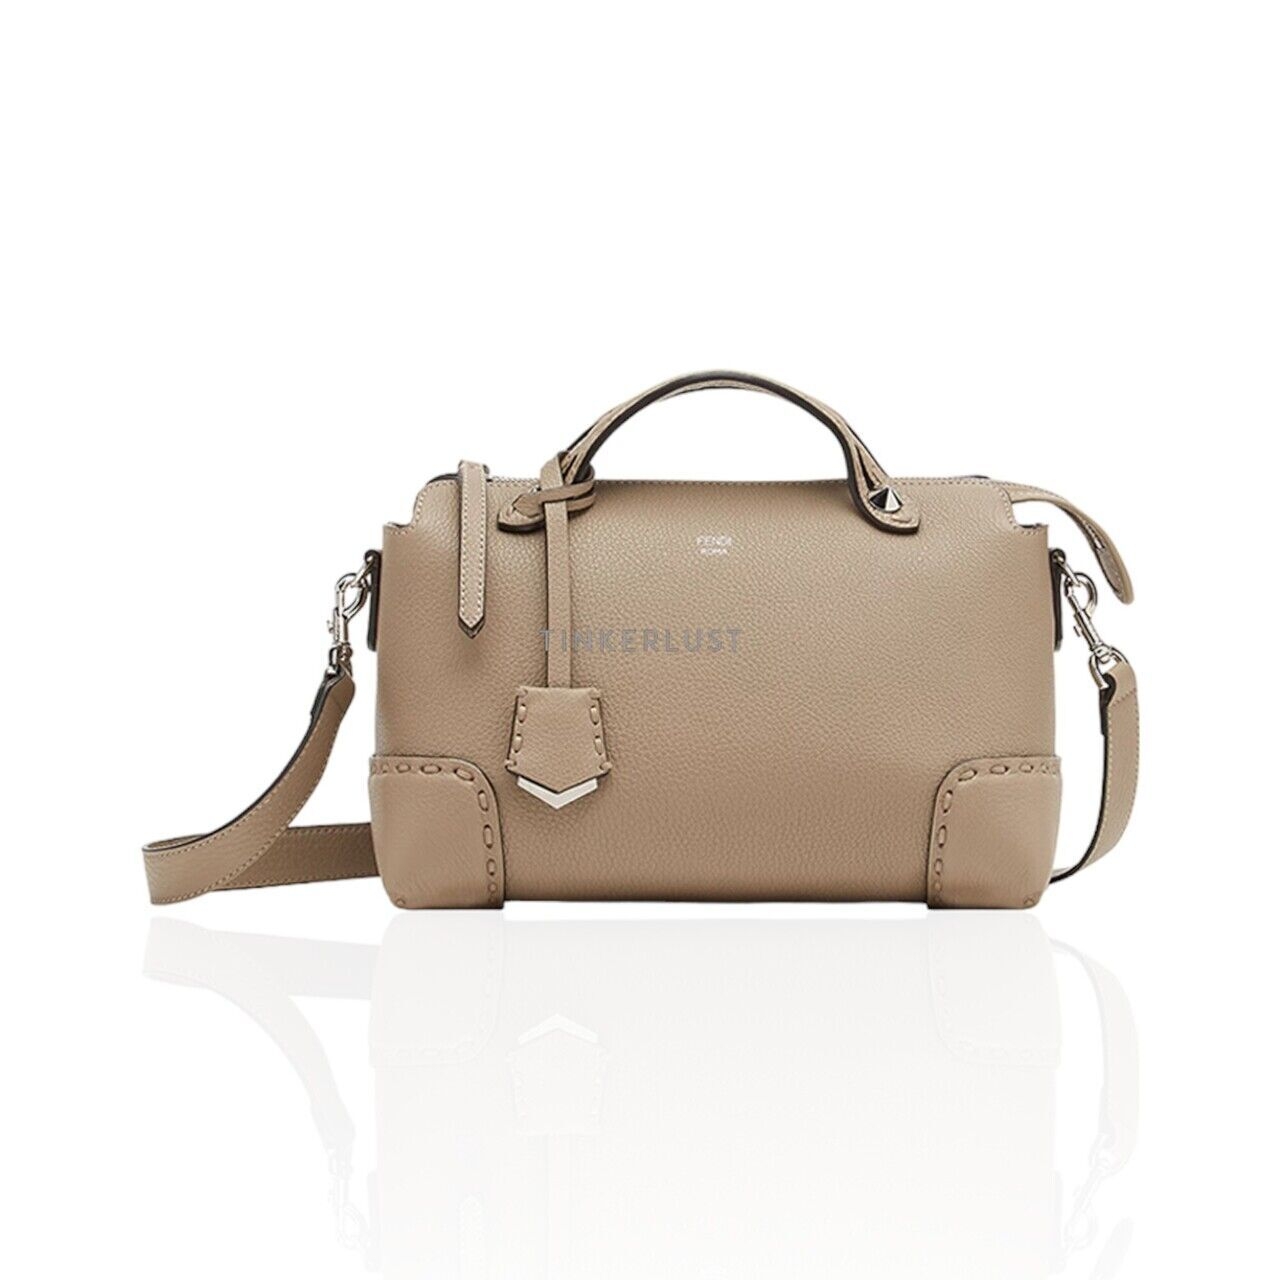 Fendi Small Selleria By The Way in Brown Leather Satchel Bag